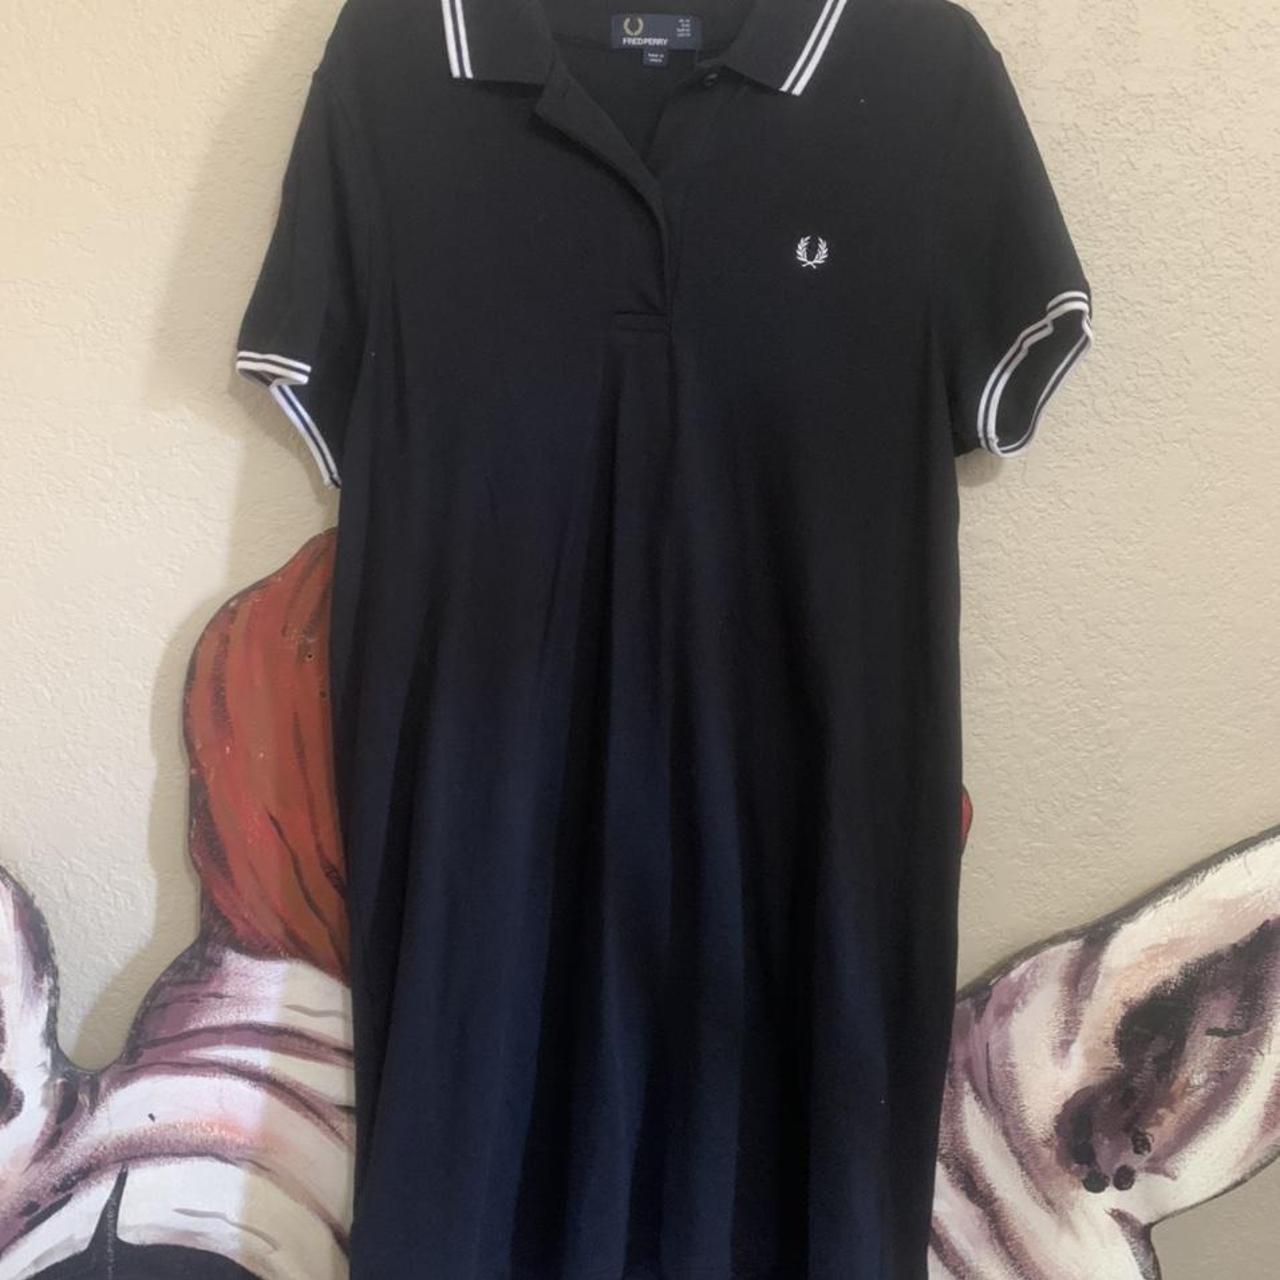 Fred Perry Women's Black and White Dress